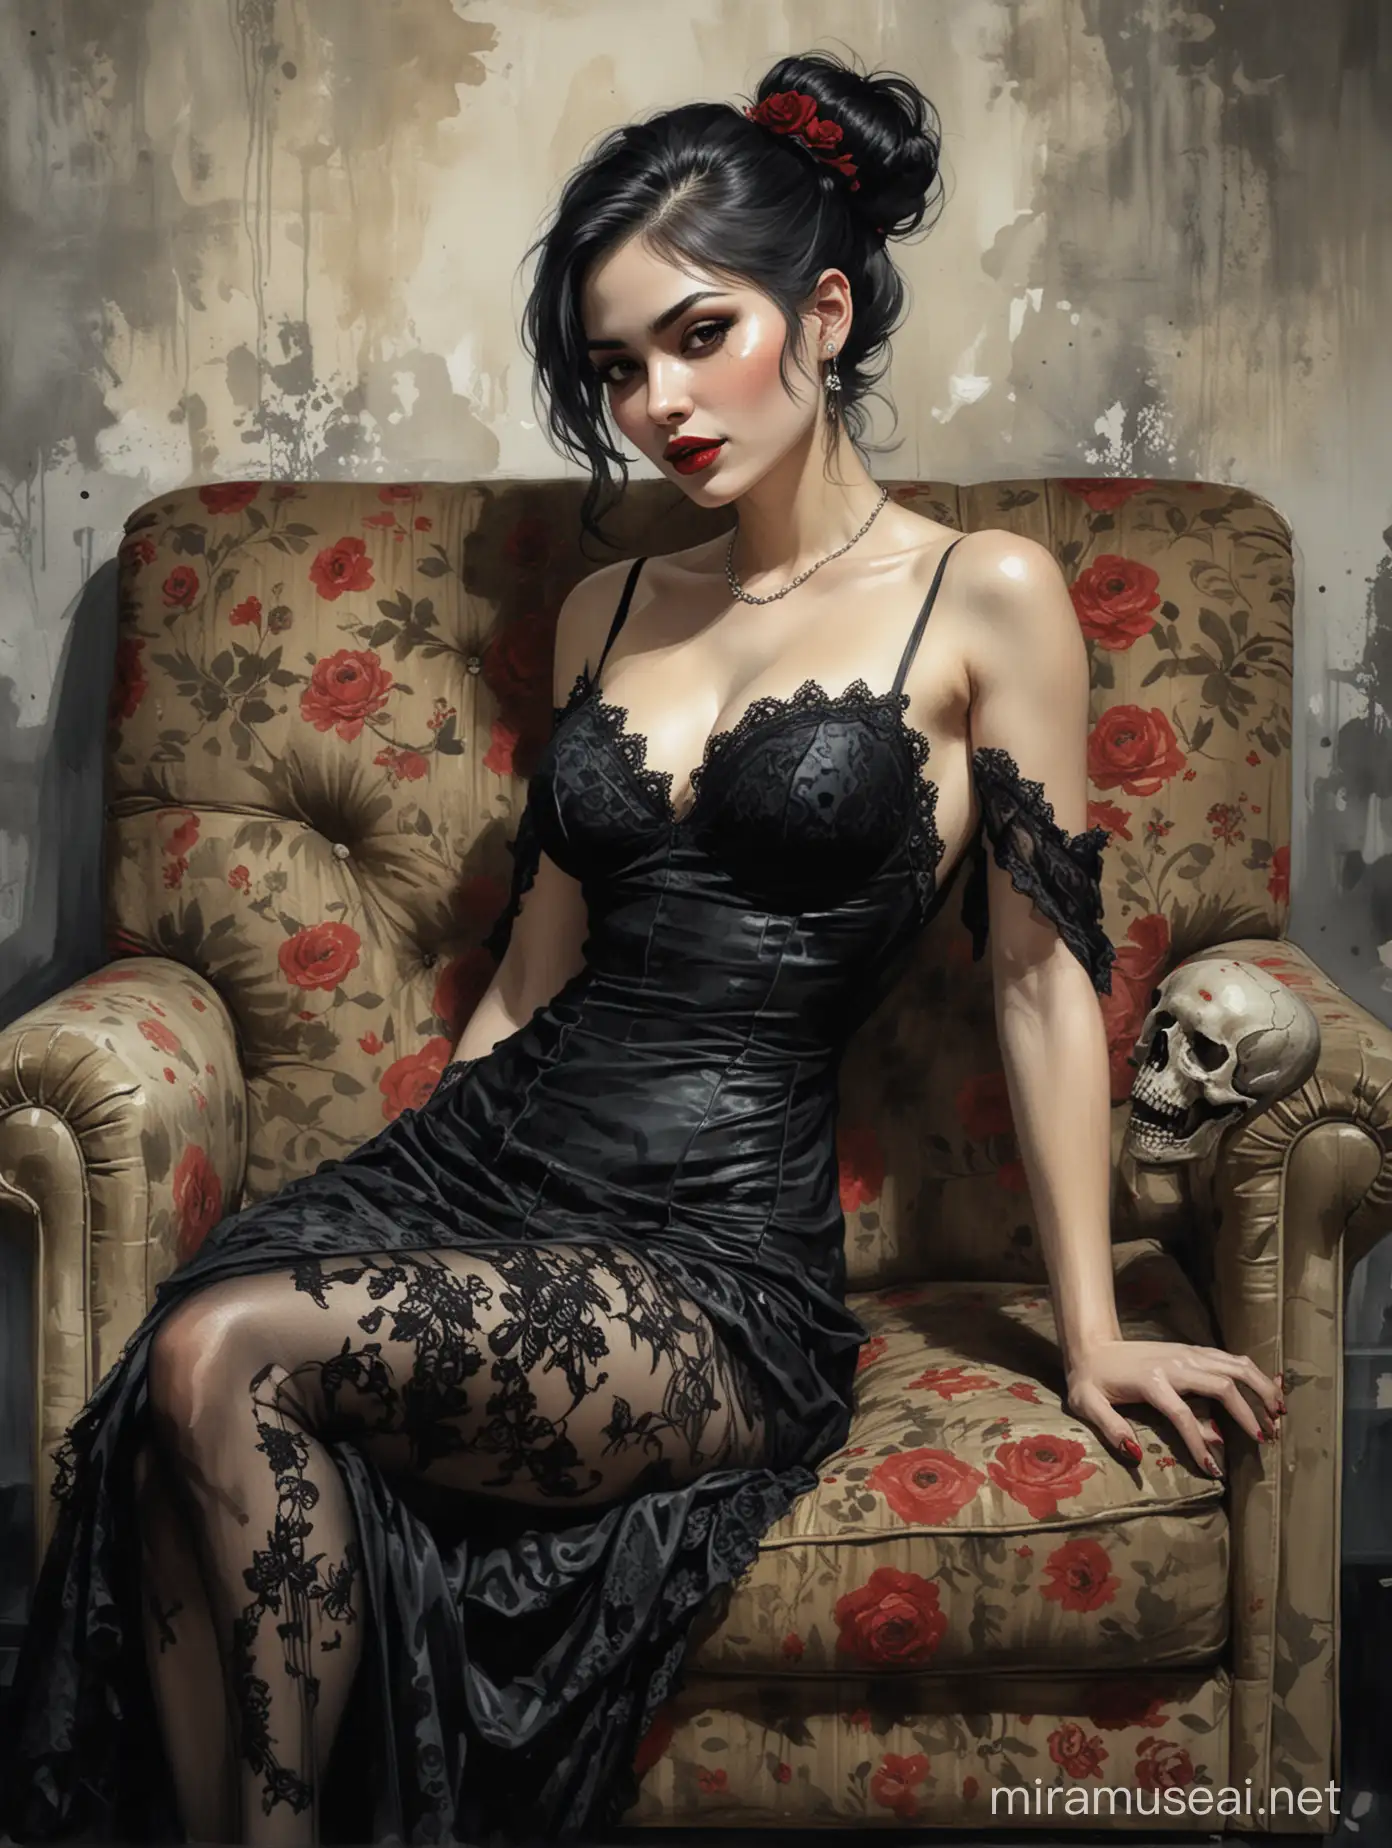 Seductively Alluring Pale Woman in Black Lace Gown on Ragged Couch